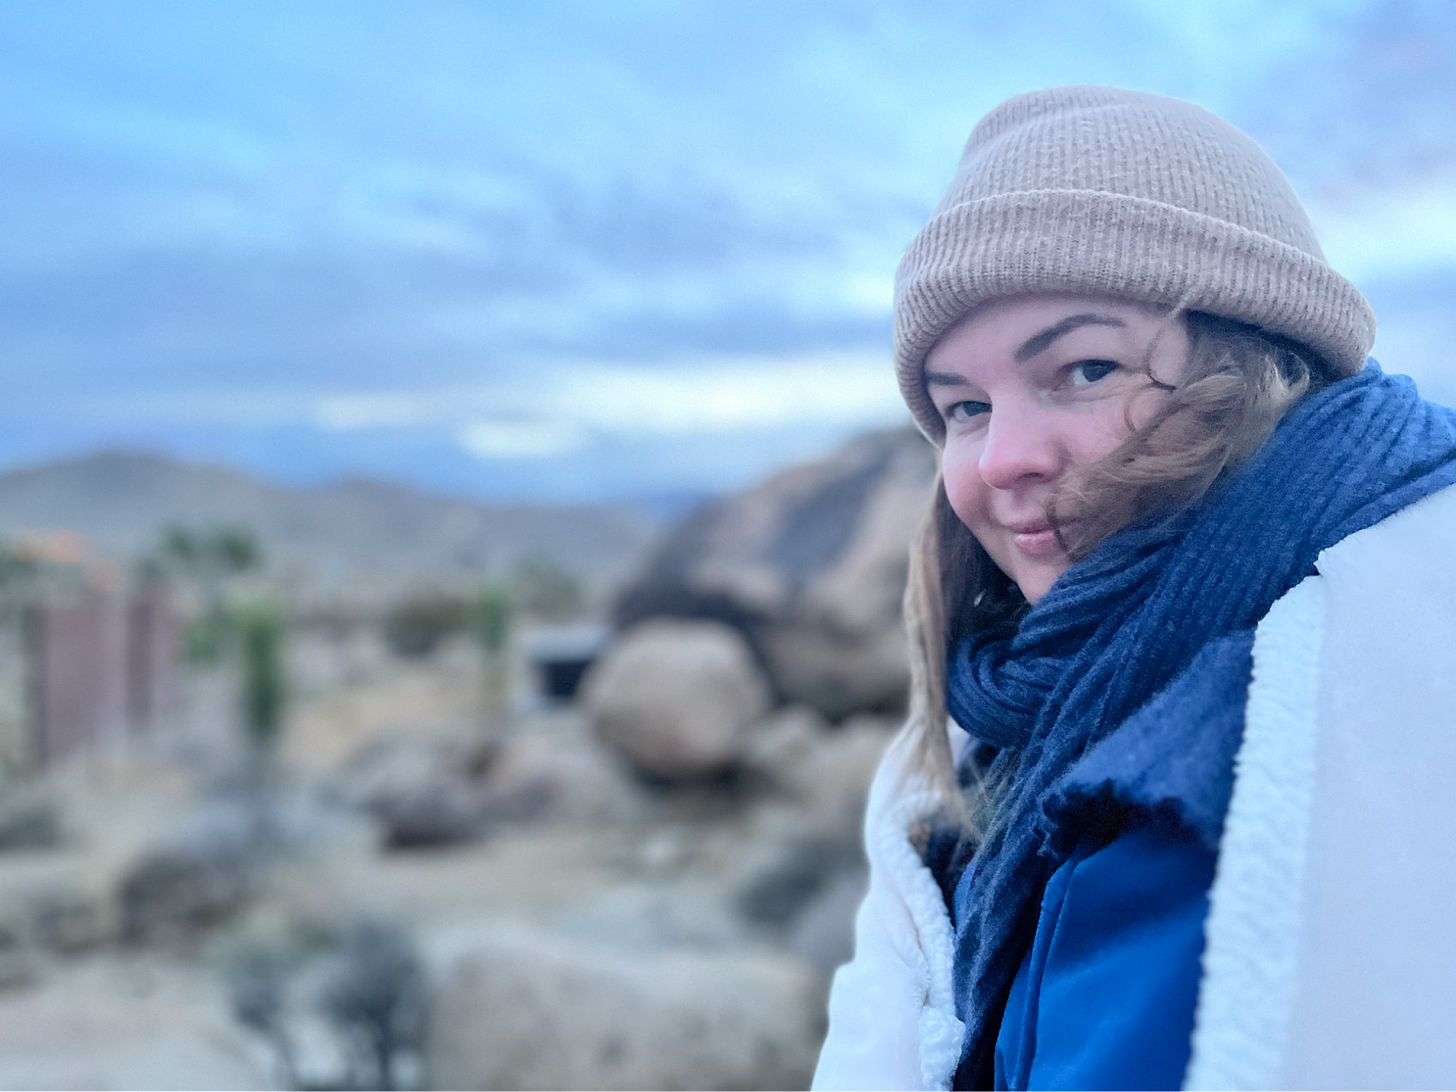 A photo of Amber looking into the camera, smiling slightly. A desert landscape is out of focus behind her.